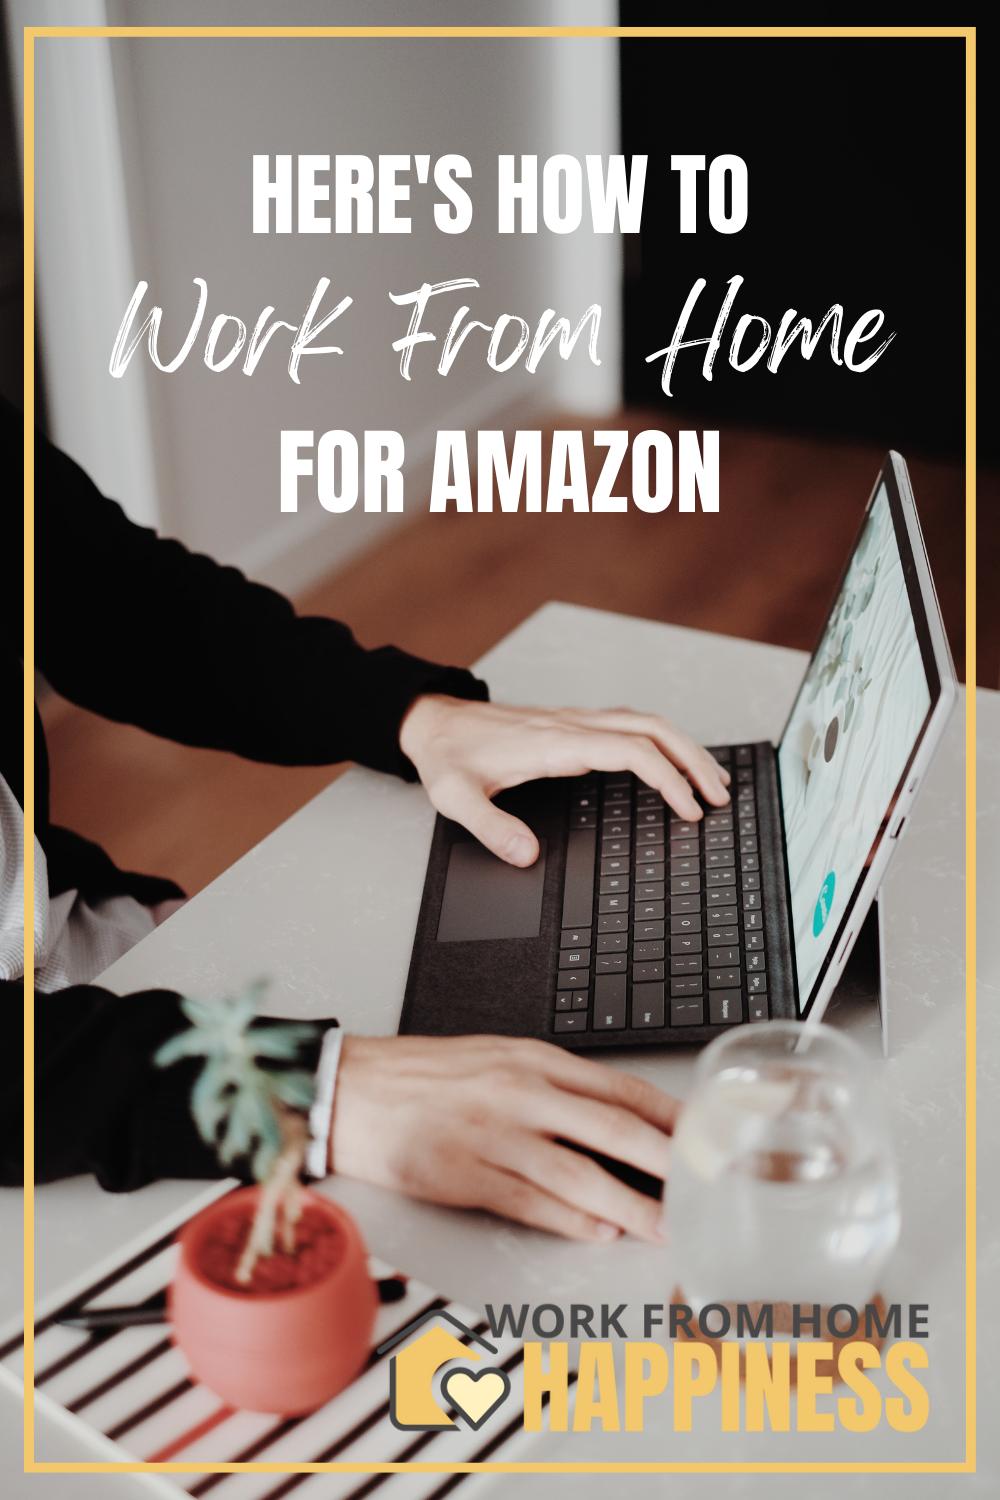 Amazon Work From Home Careers: Amazon Work from Home Benefits